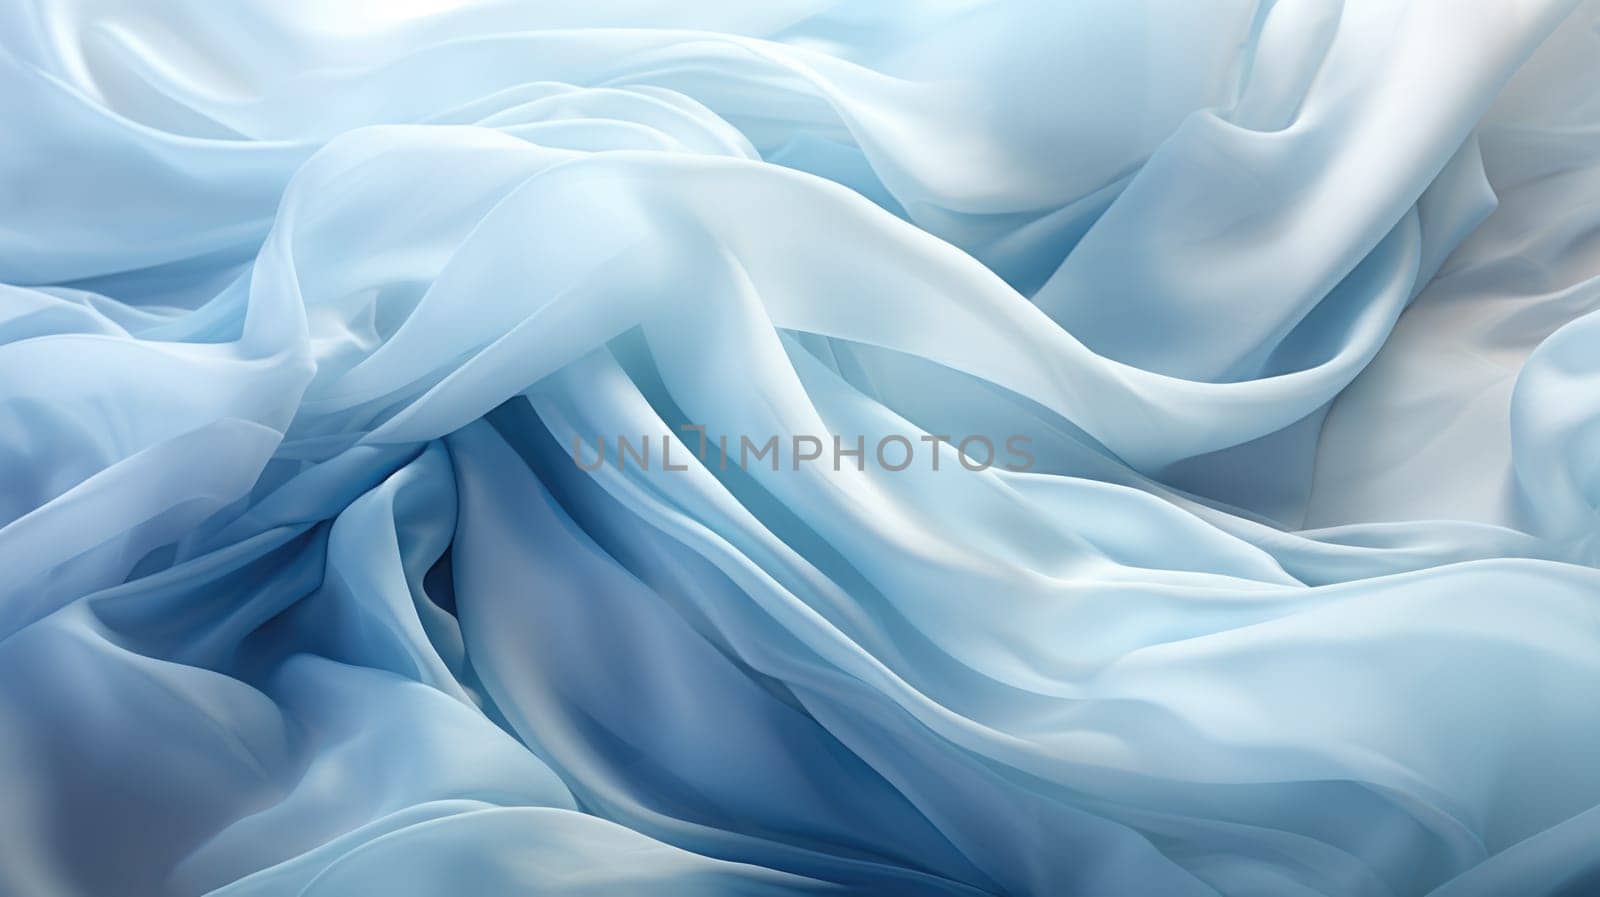 The abstract picture of wavy blue fabric waving around in bright room. AIGX01. by biancoblue